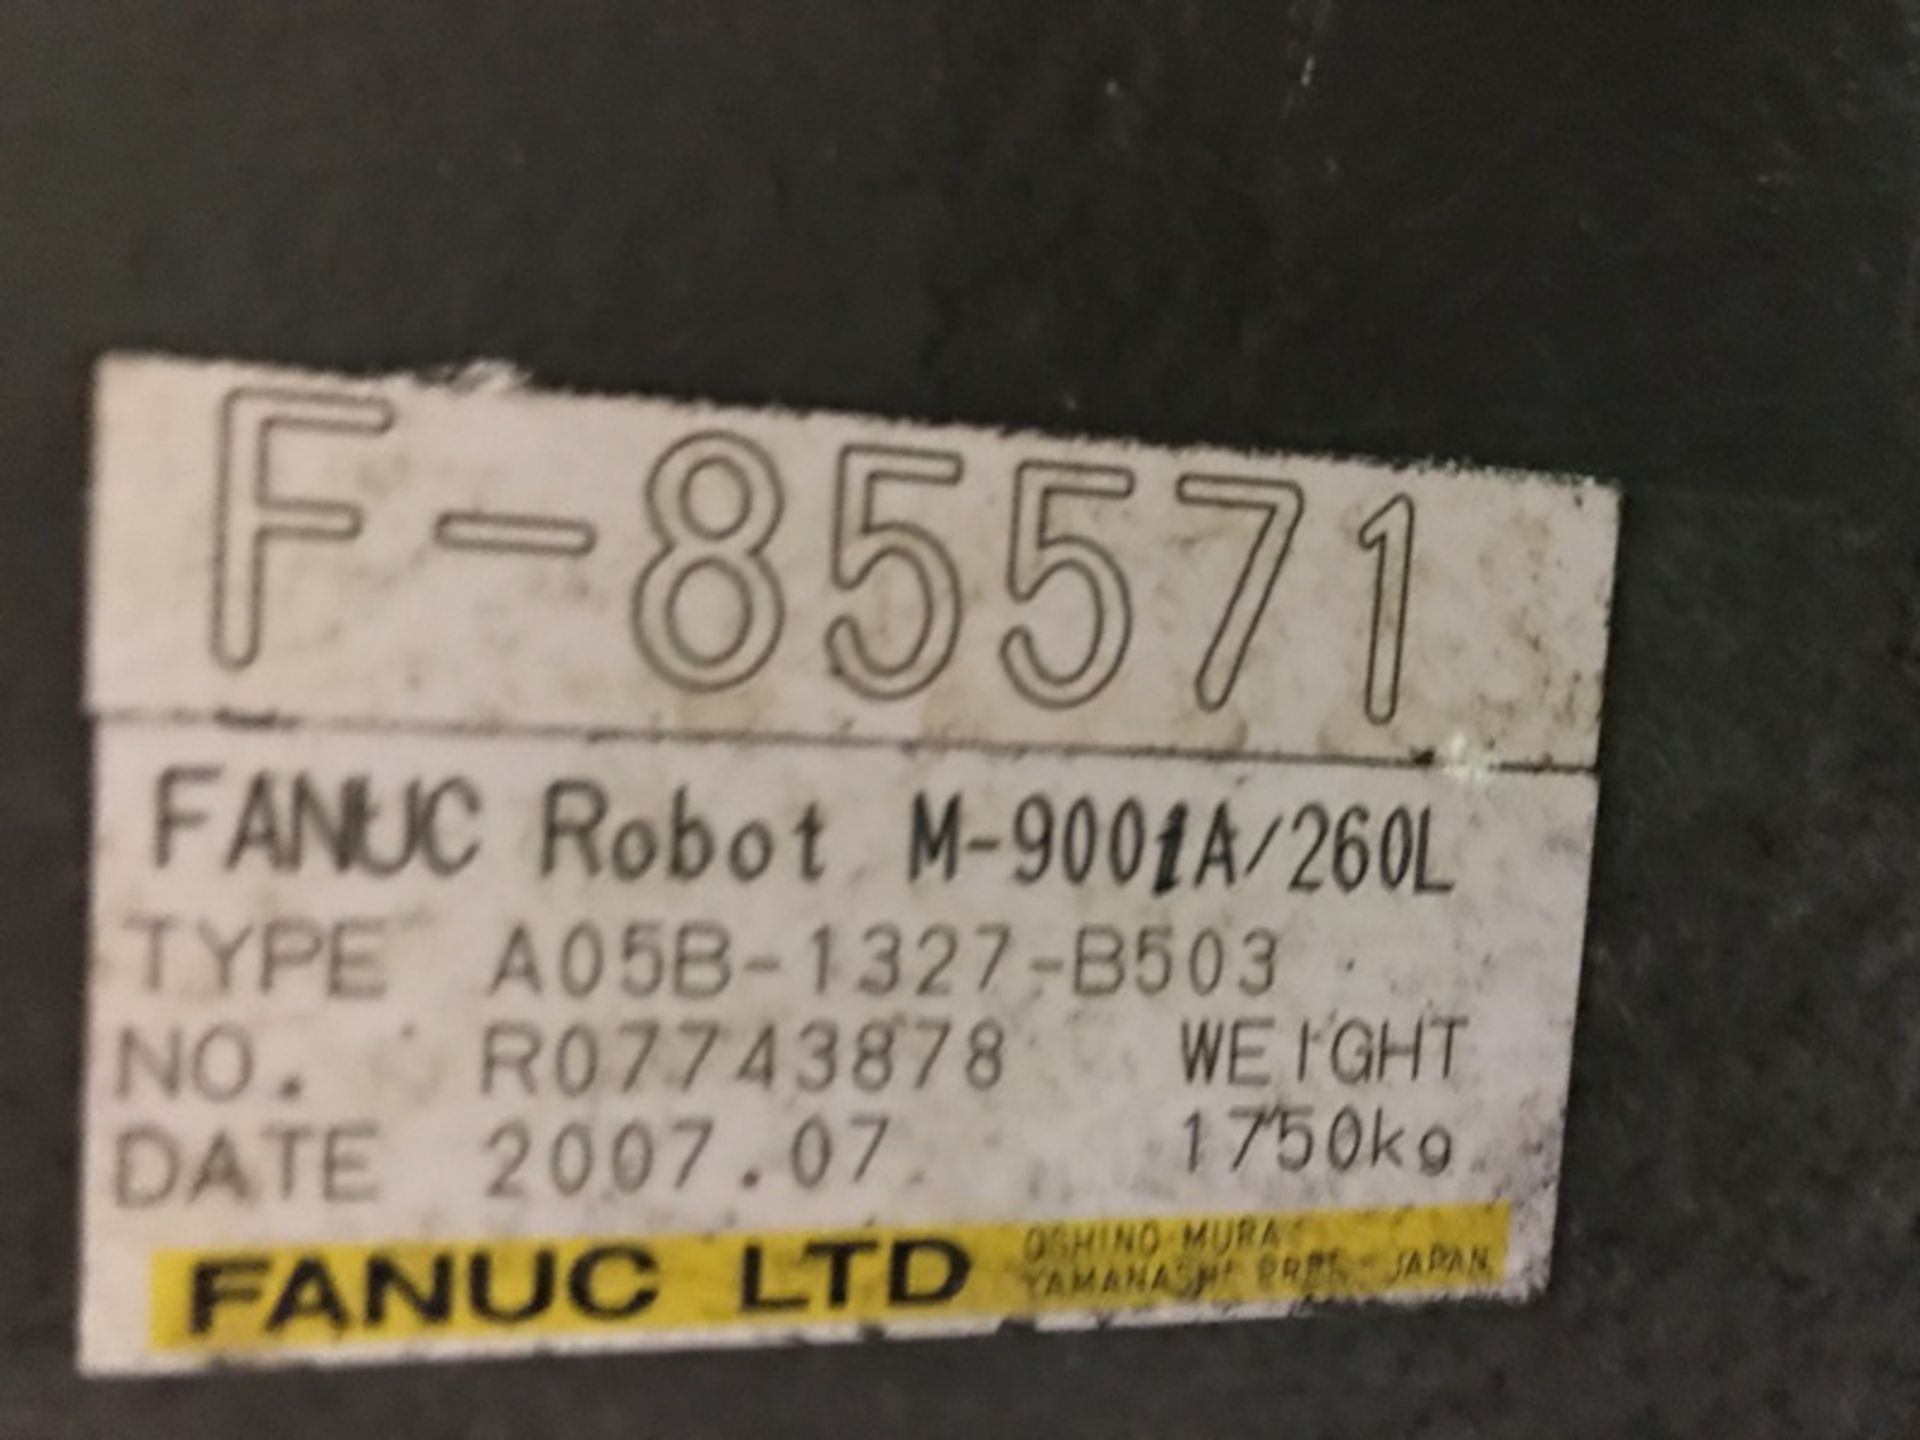 FANUC M900iA/260L 6 AXIS CNC ROBOT WITH R30iA CONTROLLER, SN F85571, LOCATION MI - Image 3 of 3